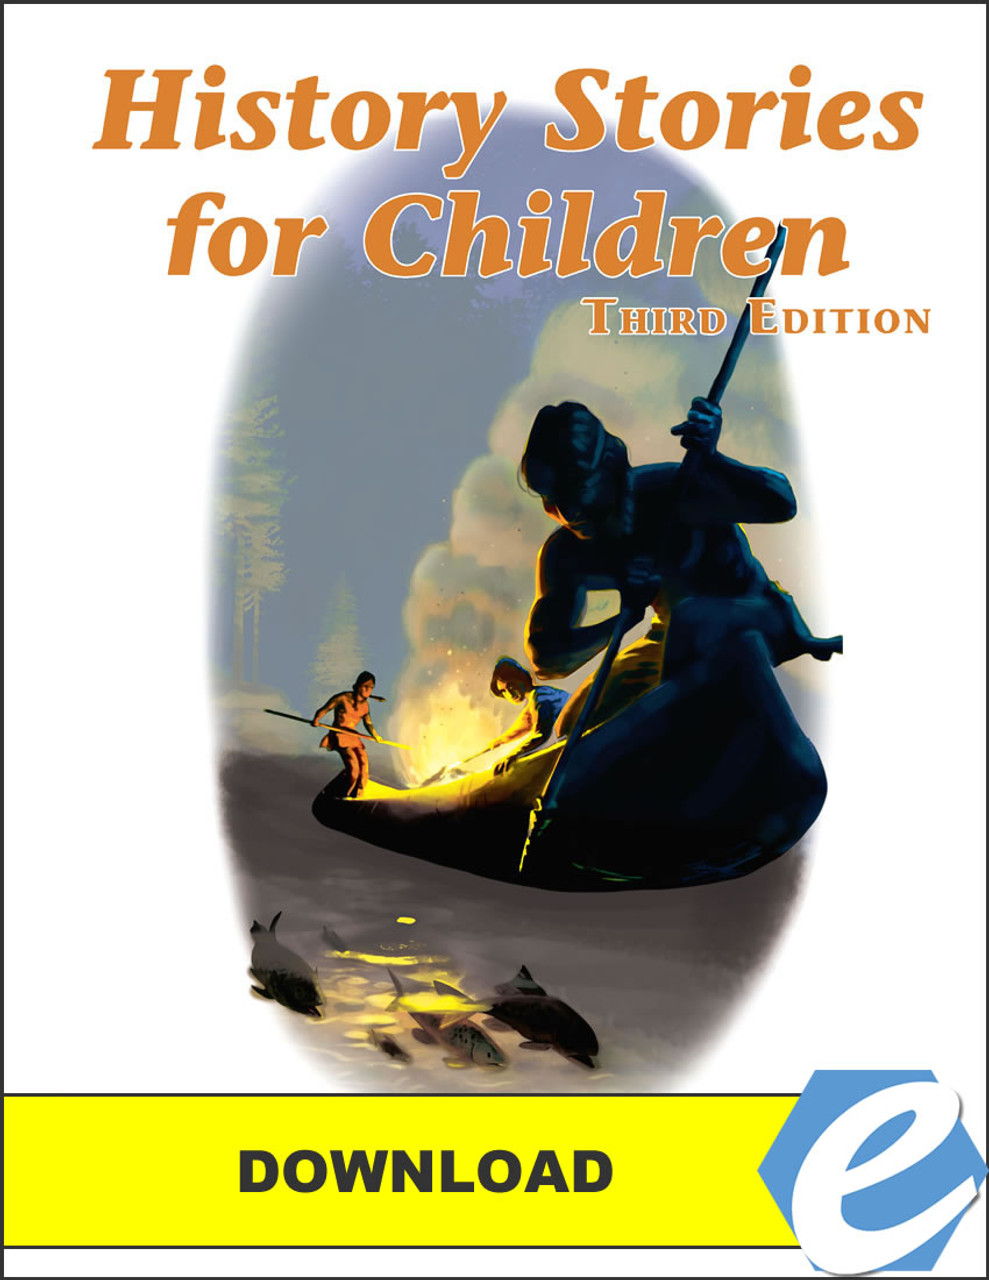 History Stories for Children, 3rd edition - Student Exercises - PDF Download